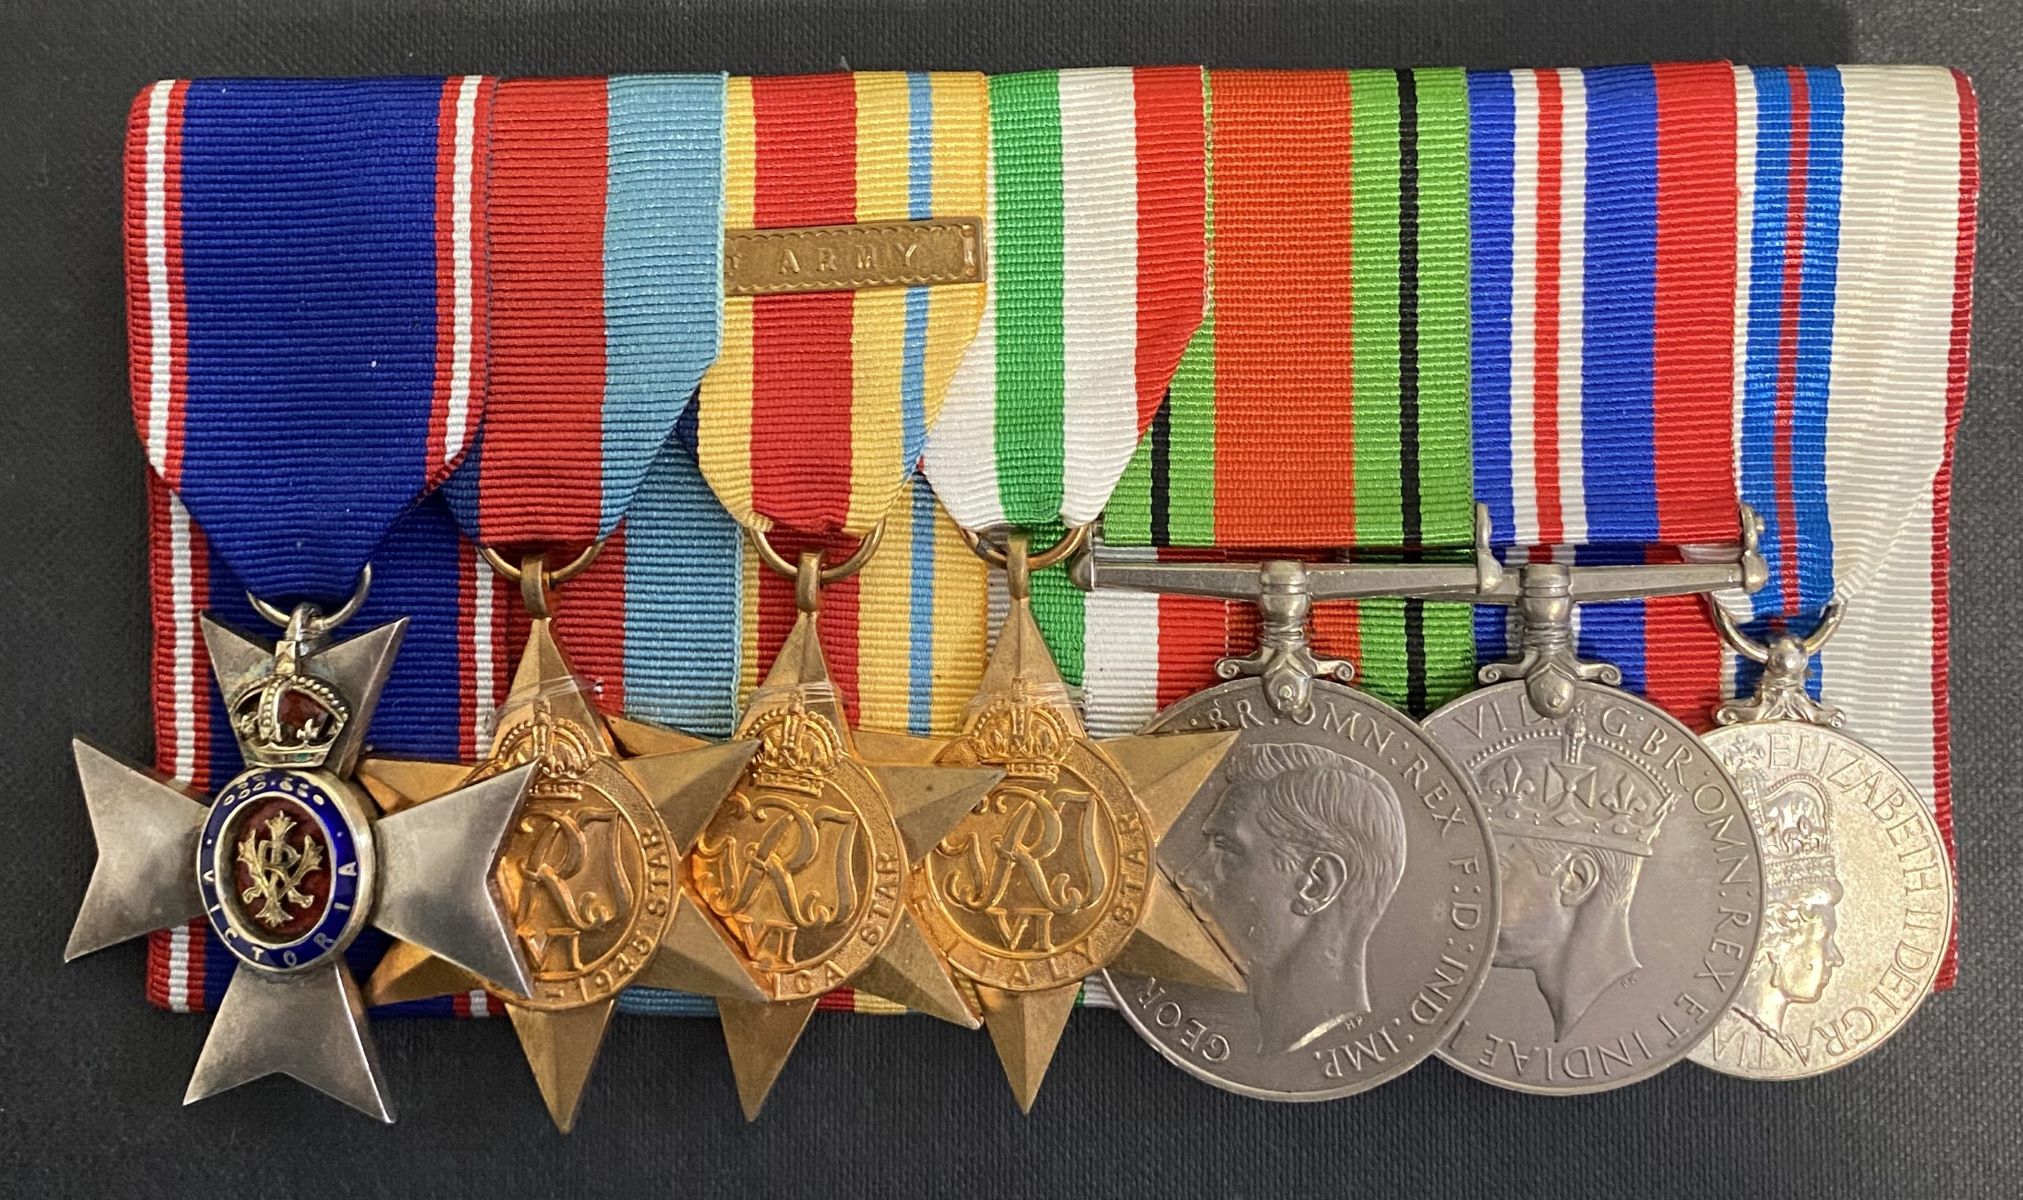 Worcestershire Medal Service: MVO 5th Cl - Group of 7